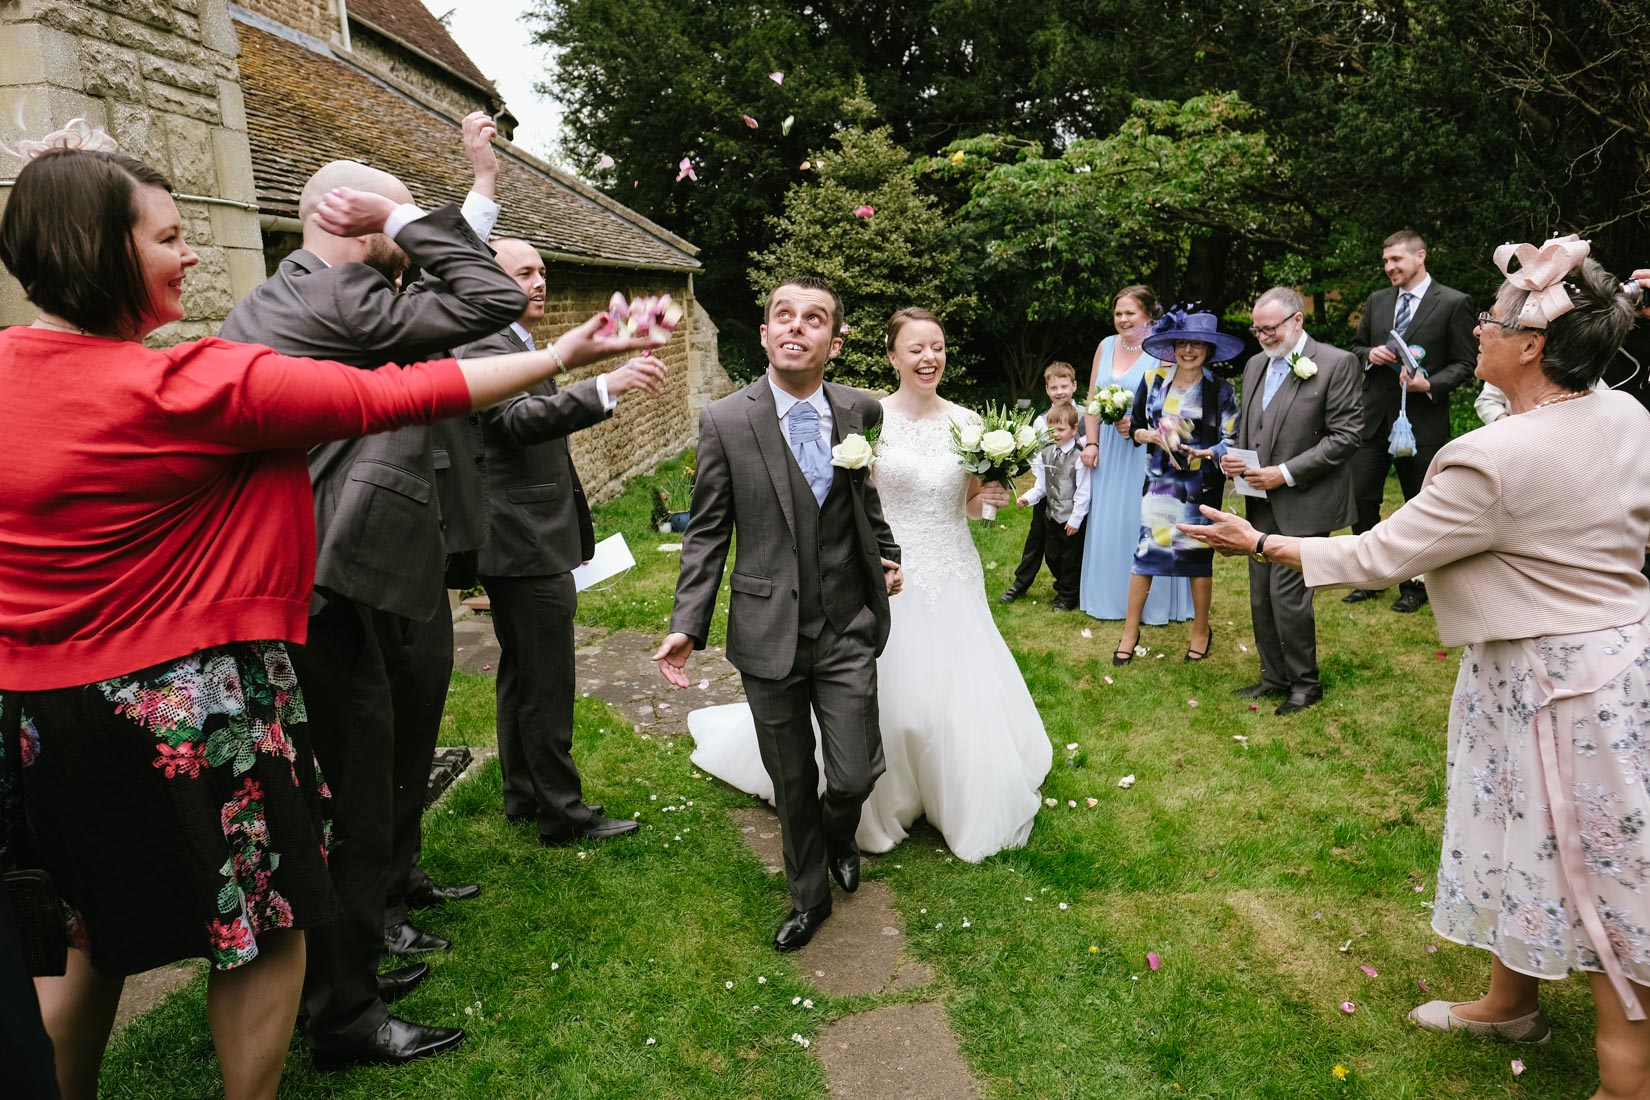  The wedding of Charlie and Pete, at St. Leonard's church and Lains Barn, Wantage 